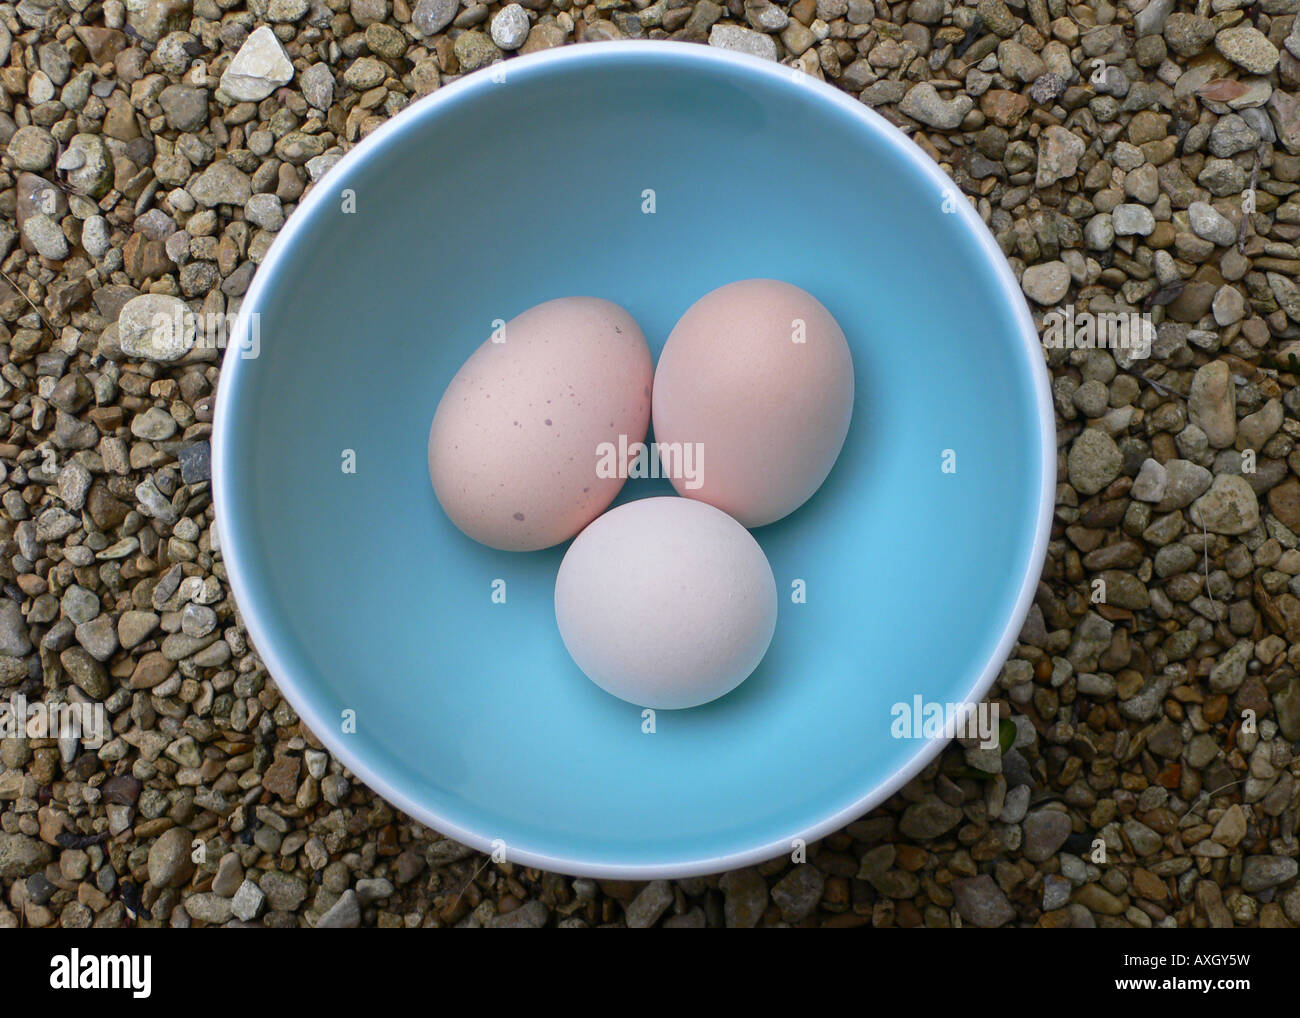 Three eggs in a blue bowl Stock Photo